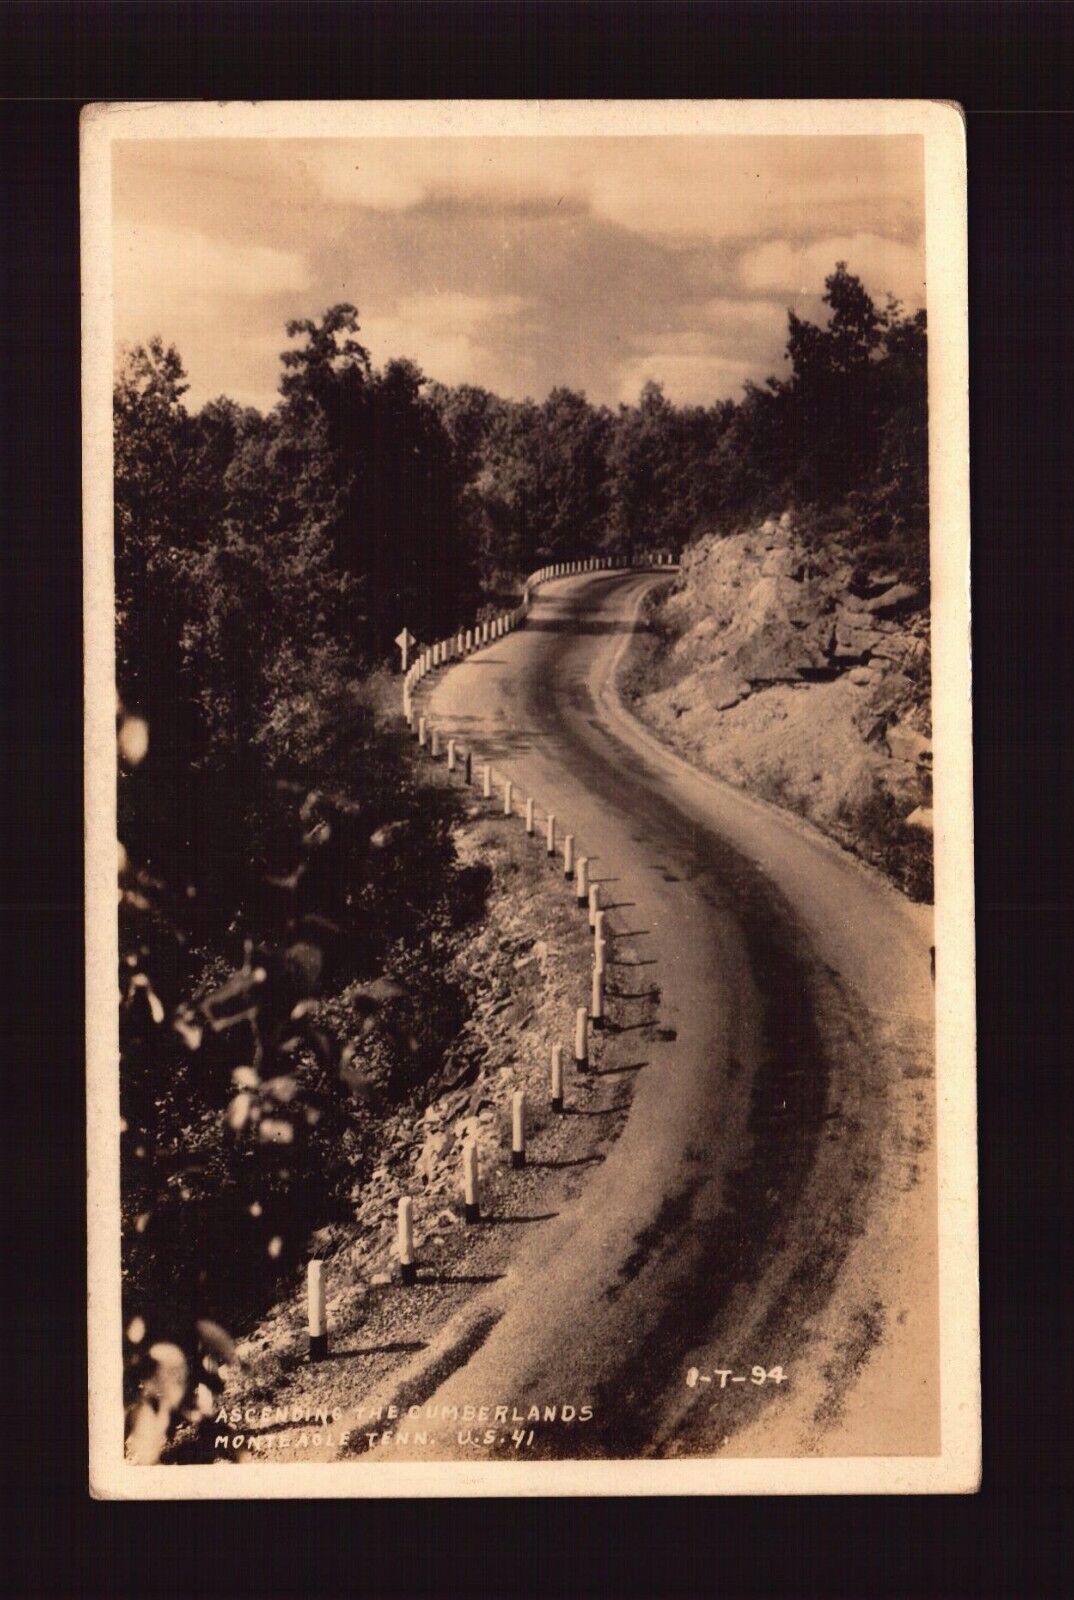 POSTCARD : TENNESSEE - MONTEAGLE TN - RPPC ASCENDING THE CUMBERLANDS REAL PHOTO